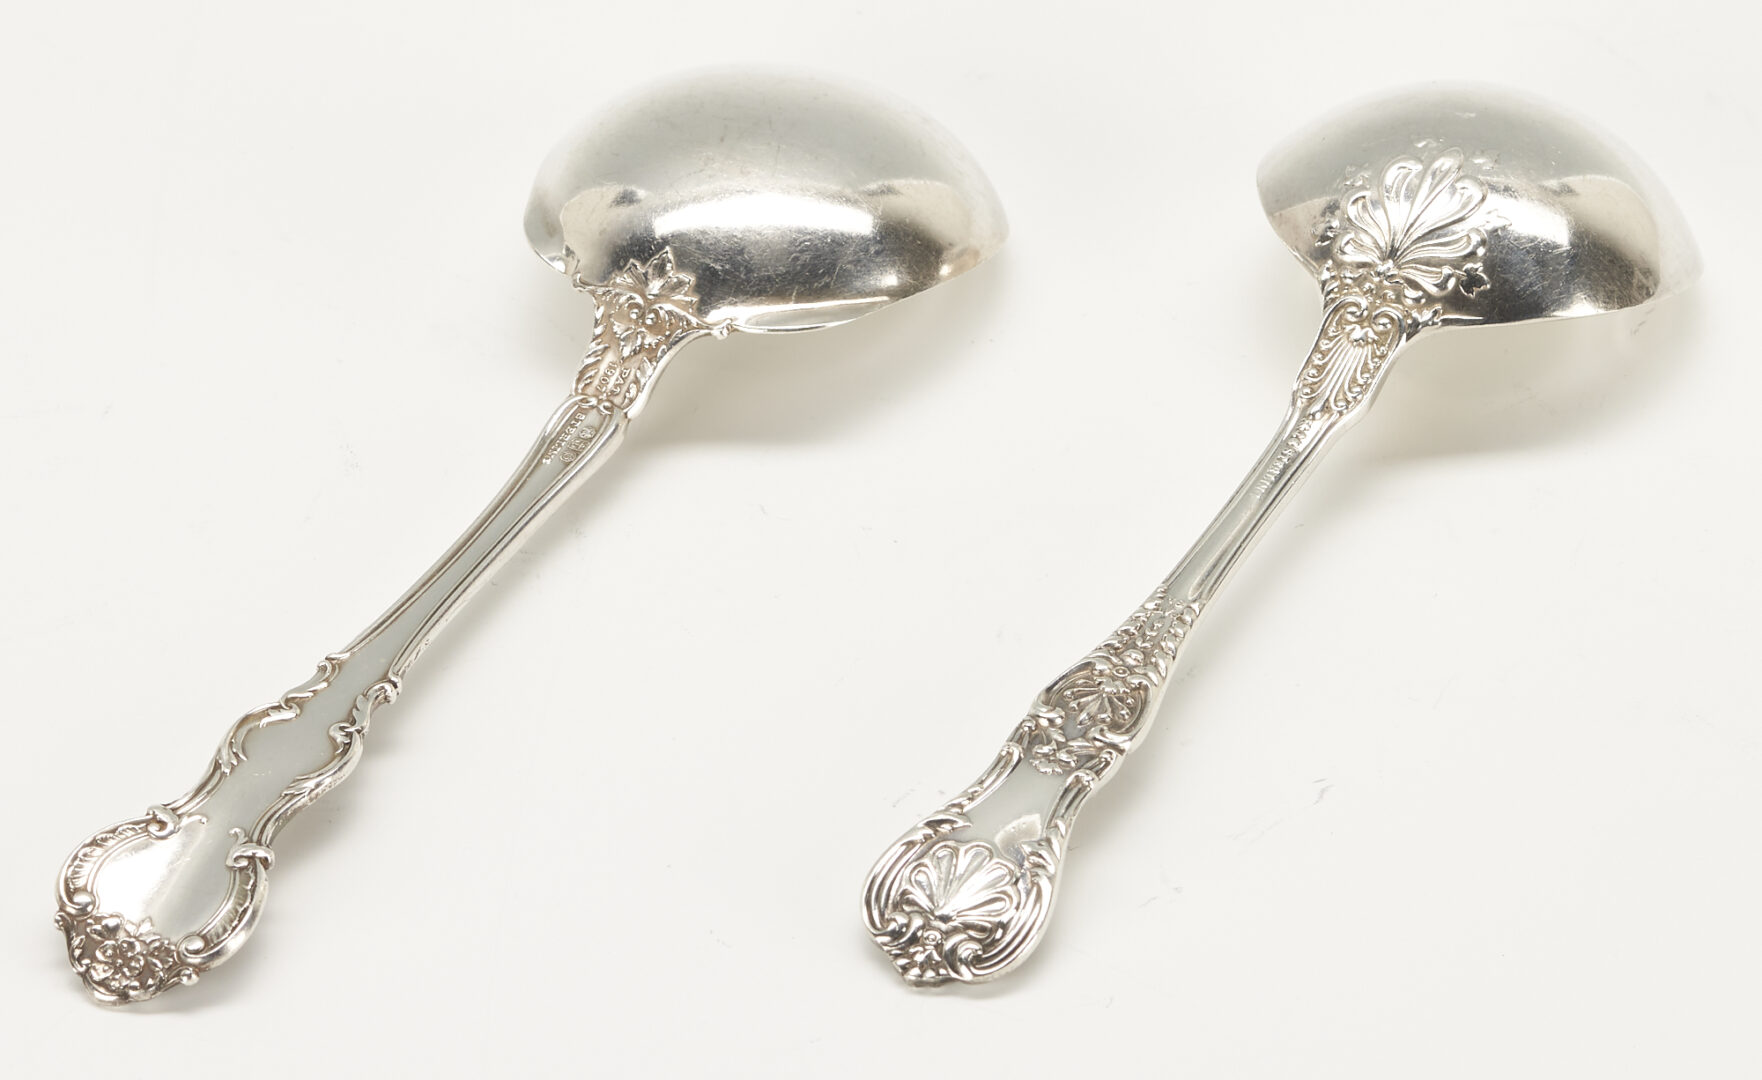 Lot 1096: 17 Sterling Silver Items, Gorham Soup Spoons & Howard Repousse Bowl